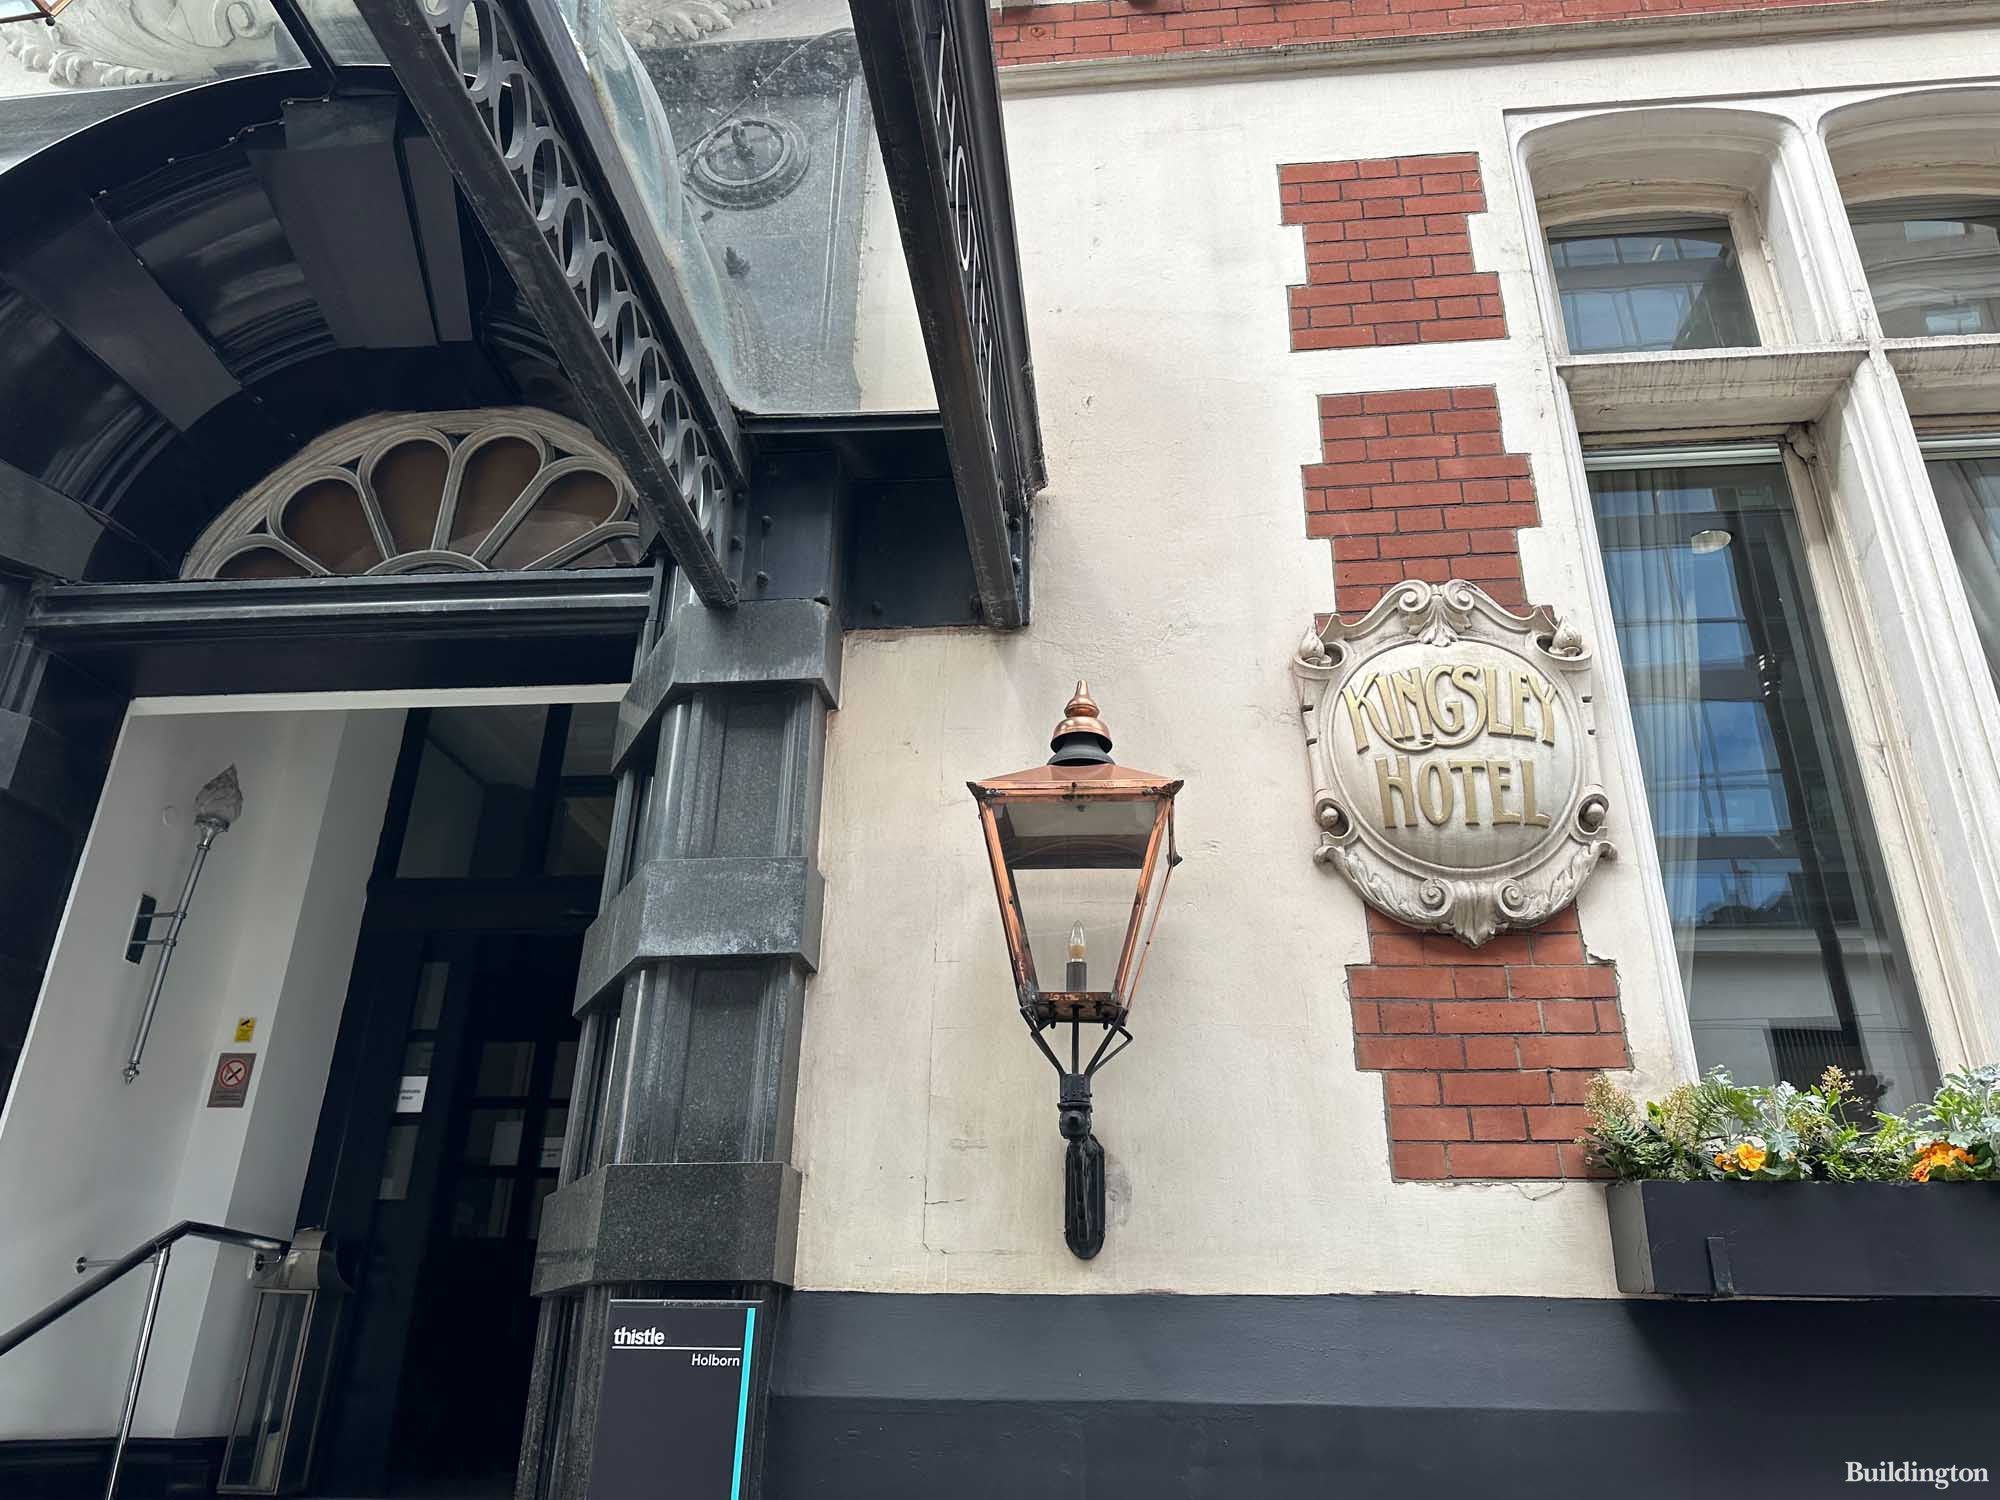 Entrance to Thistle Hotel Holborn, formerly Kingley Hotel, on Bloomsbury Way in London WC1.